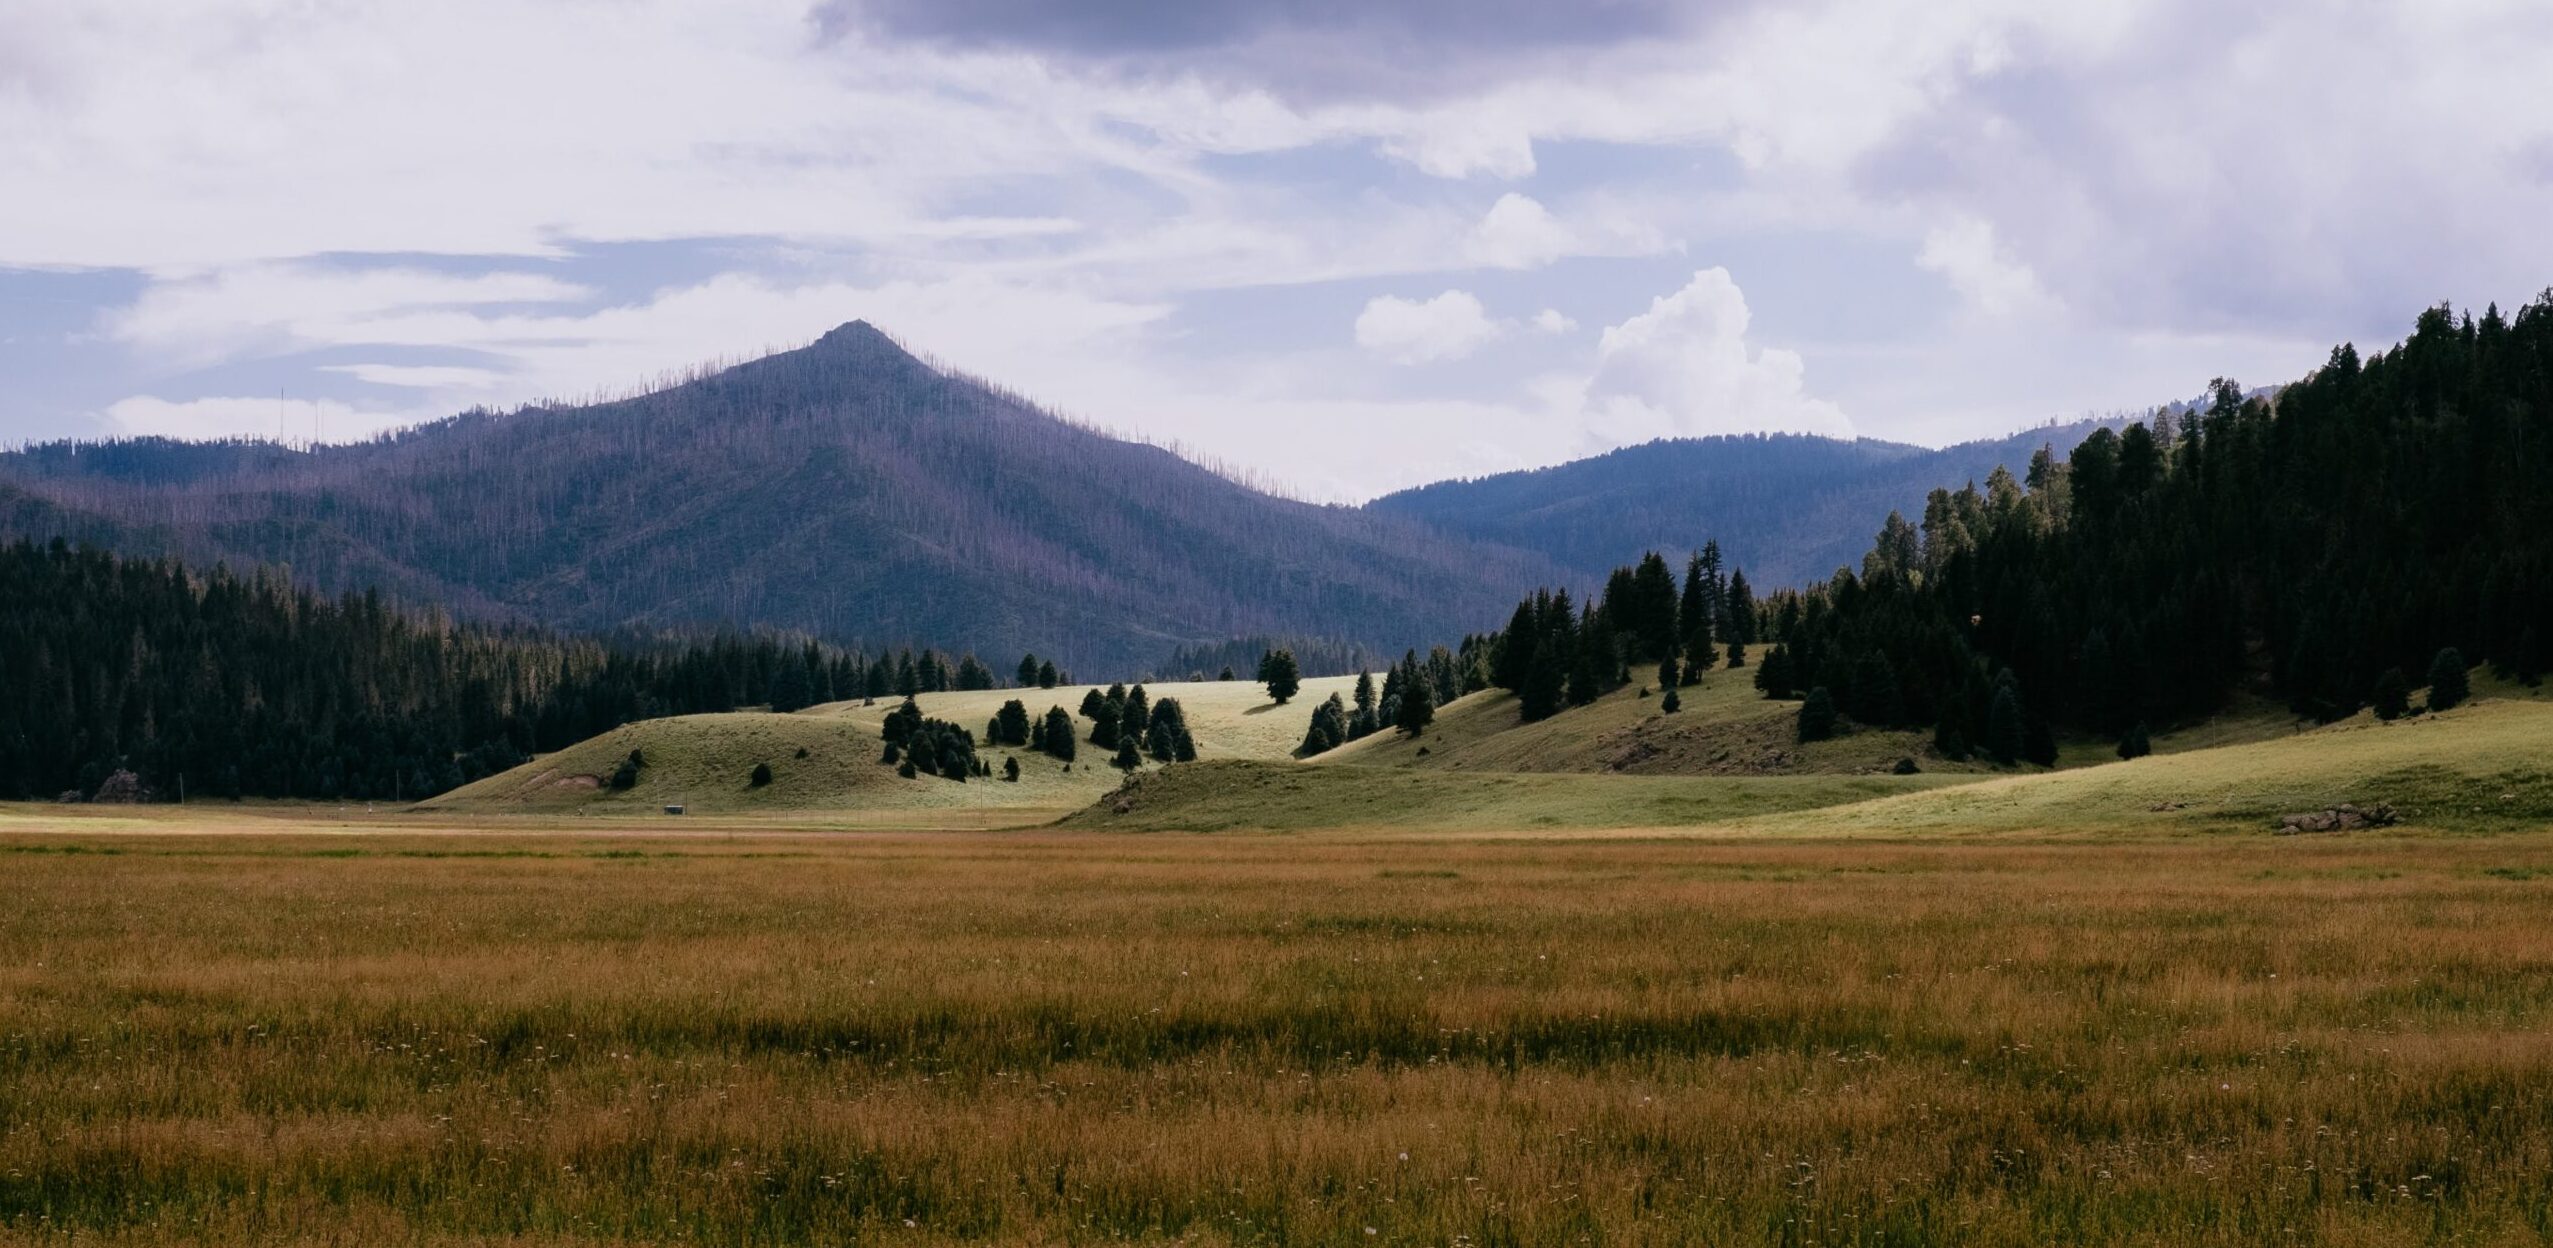 Action Alert: Comment on the Future of the Valles Caldera National Preserve